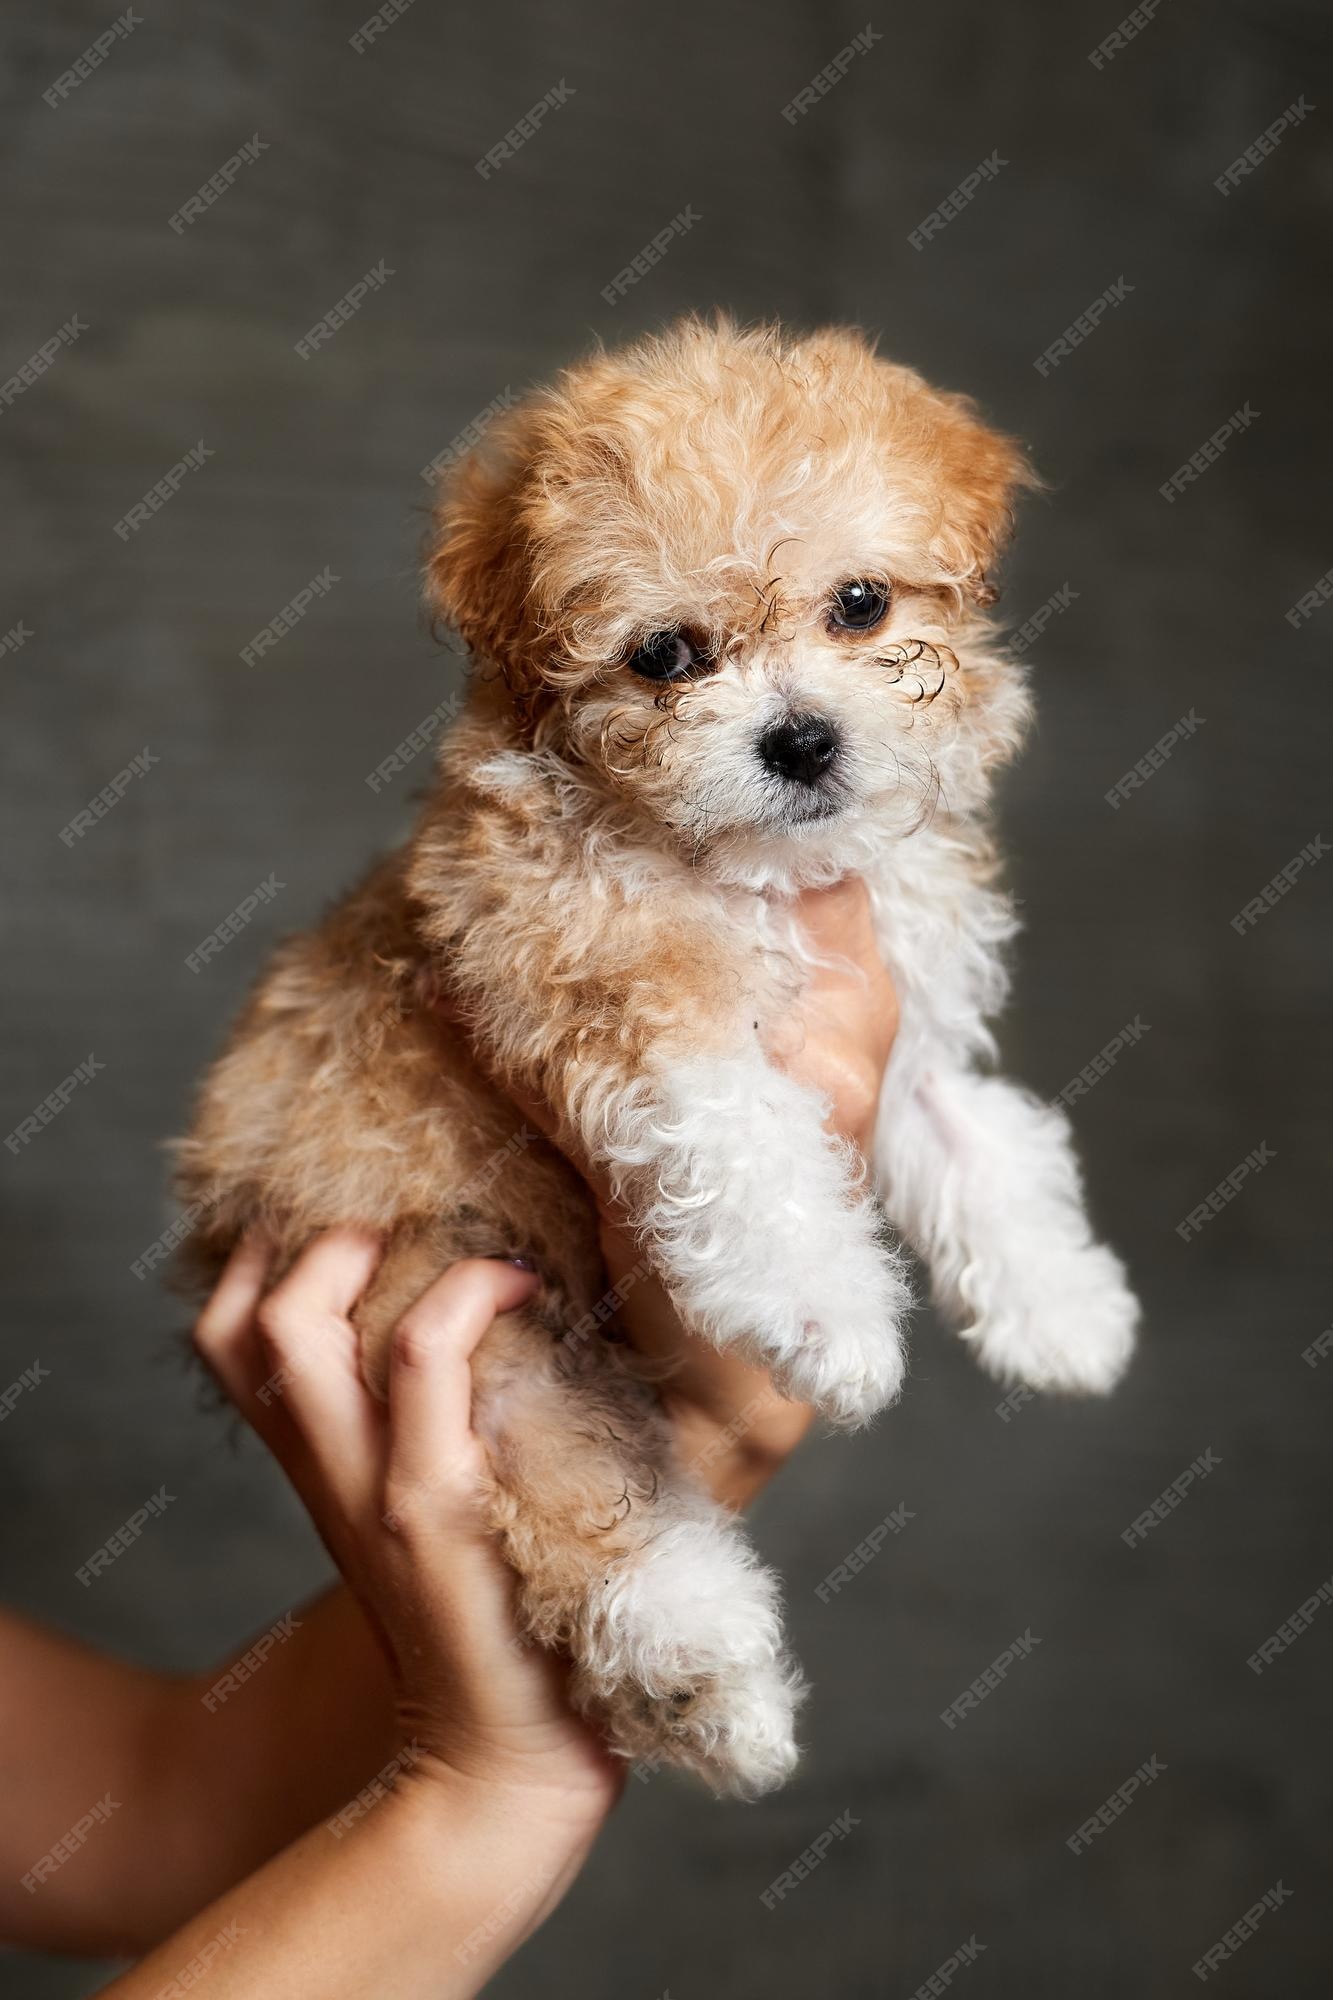 Premium Photo | Maltipoo puppy adorable maltese and poodle mix puppy in women hands gray background